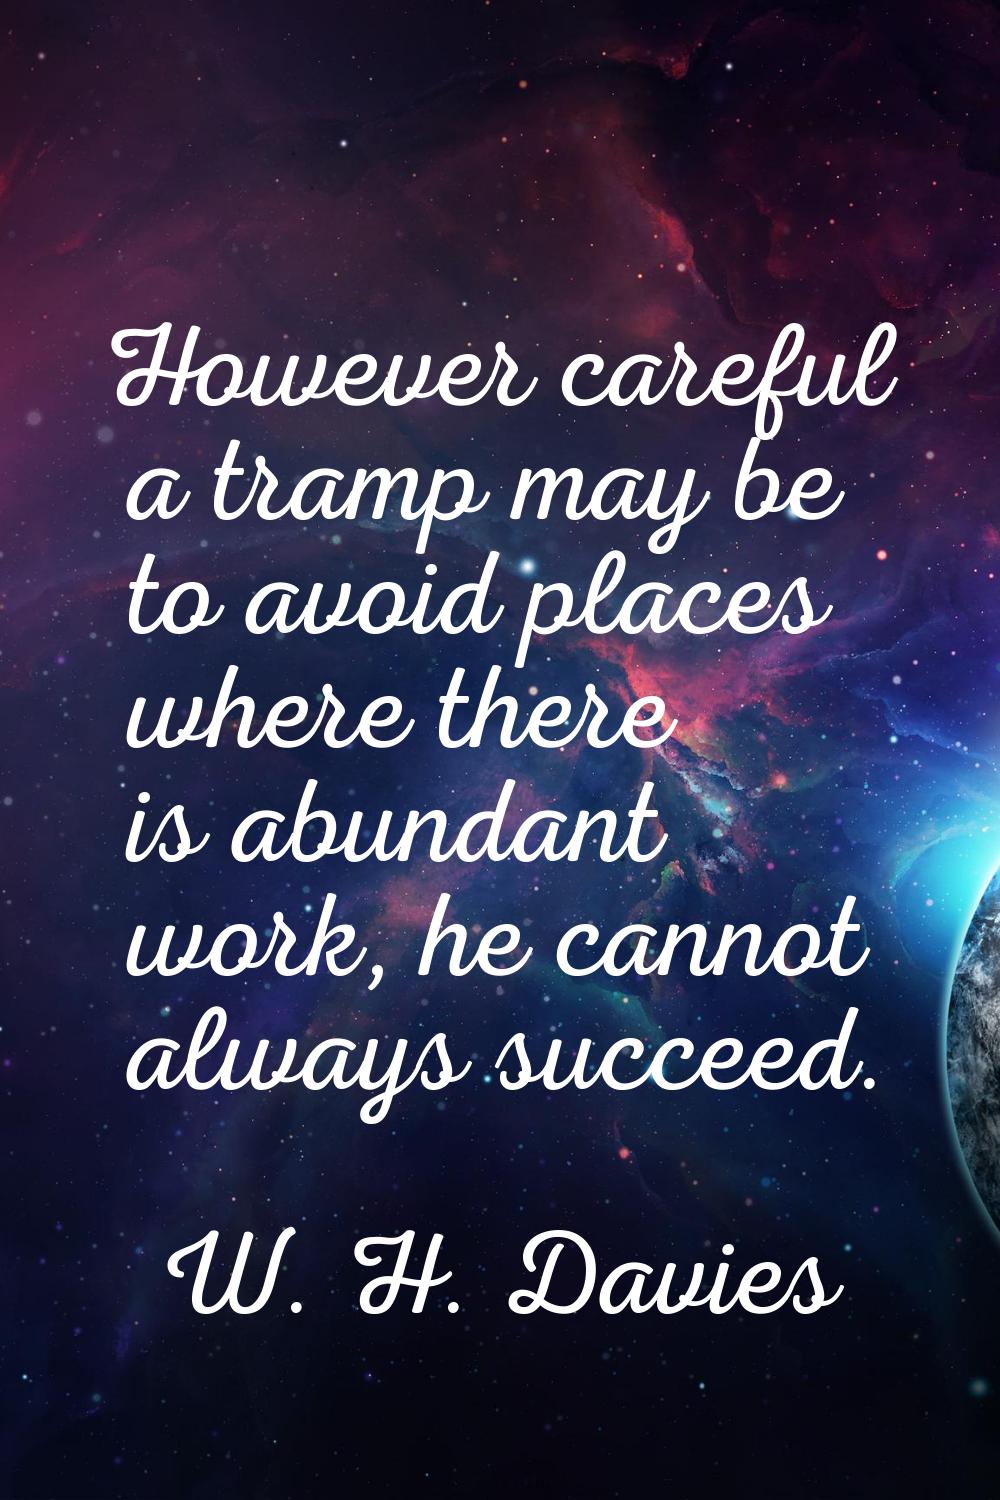 However careful a tramp may be to avoid places where there is abundant work, he cannot always succe